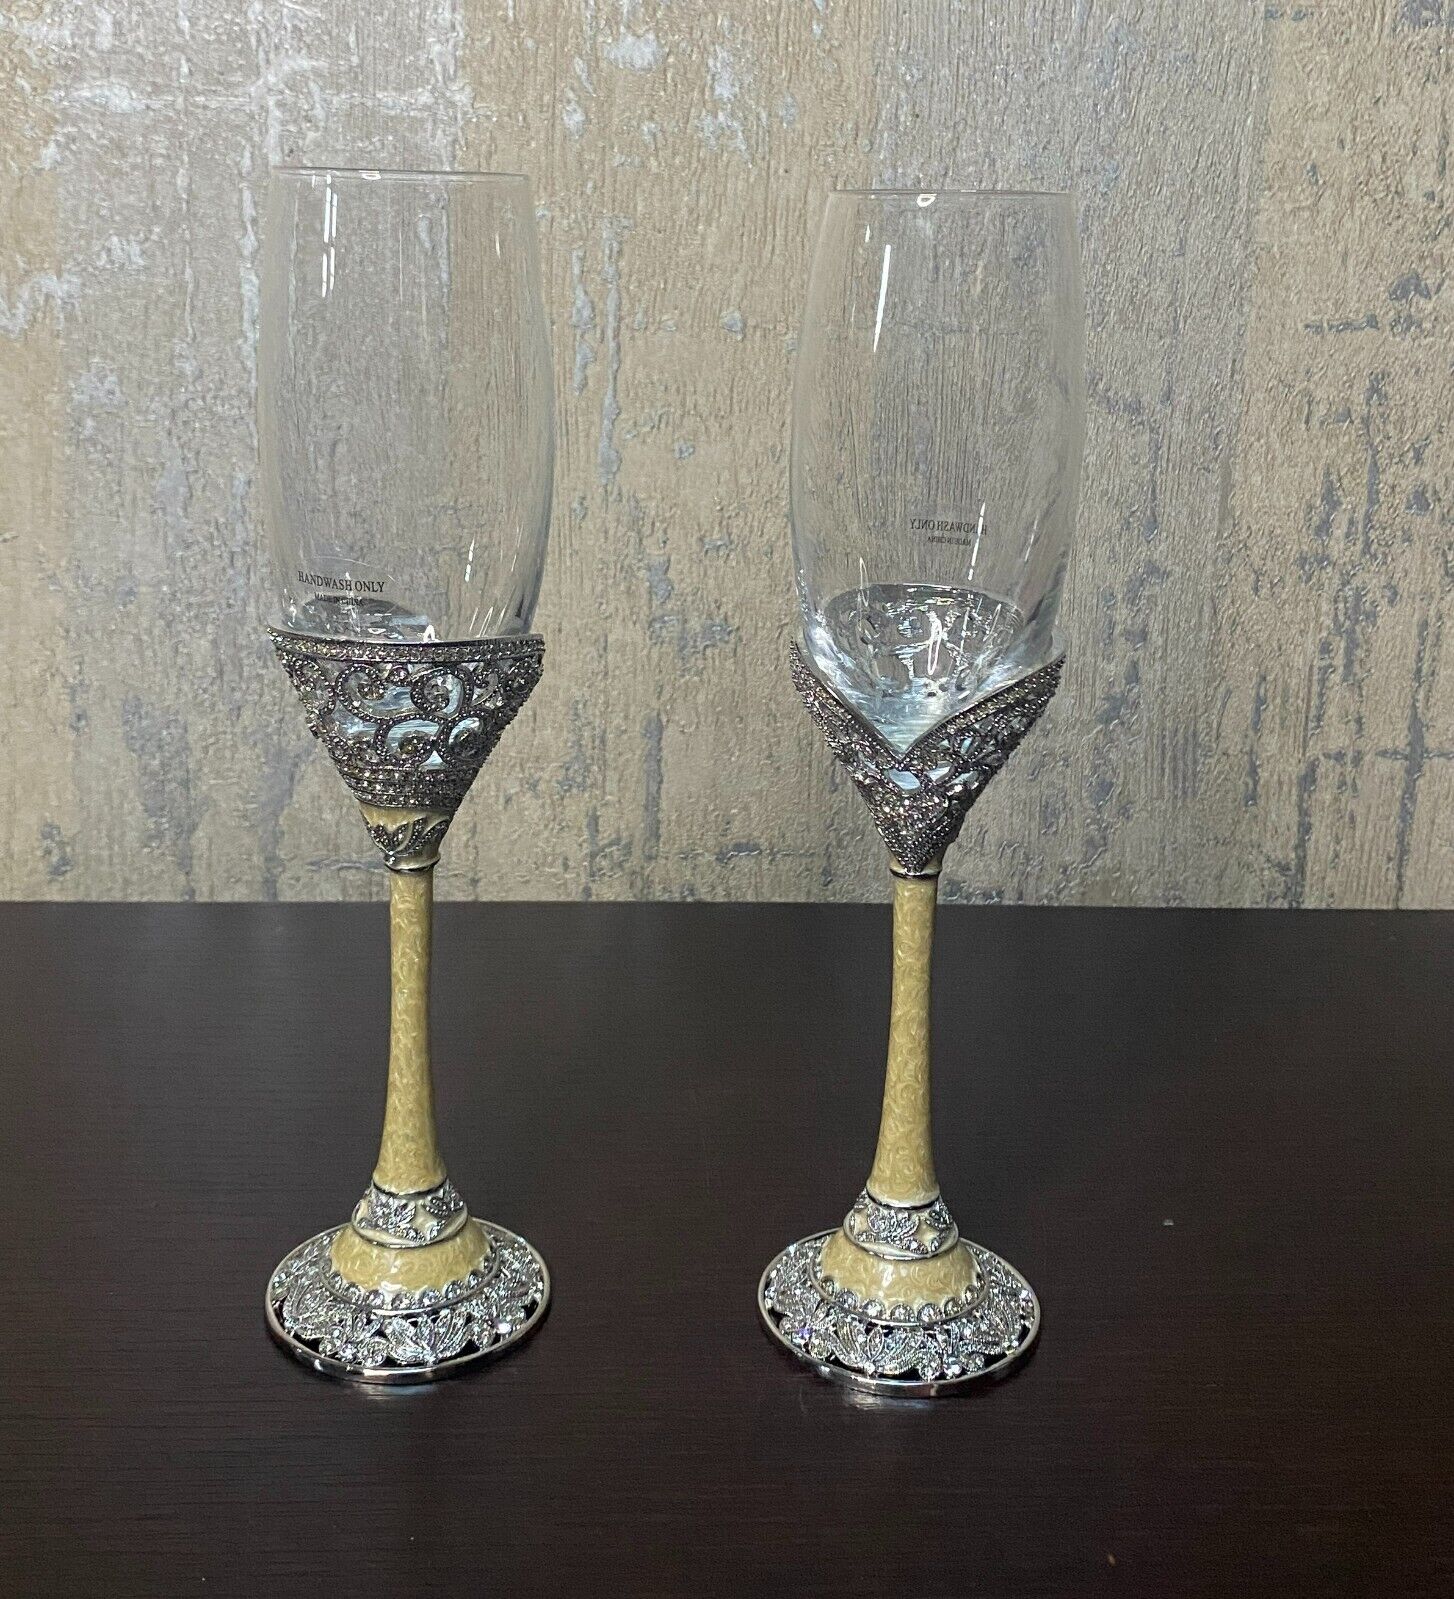 Things Remembered Bride and Groom Champagne Glasses Flutes 8 oz New in Box Things Remembered